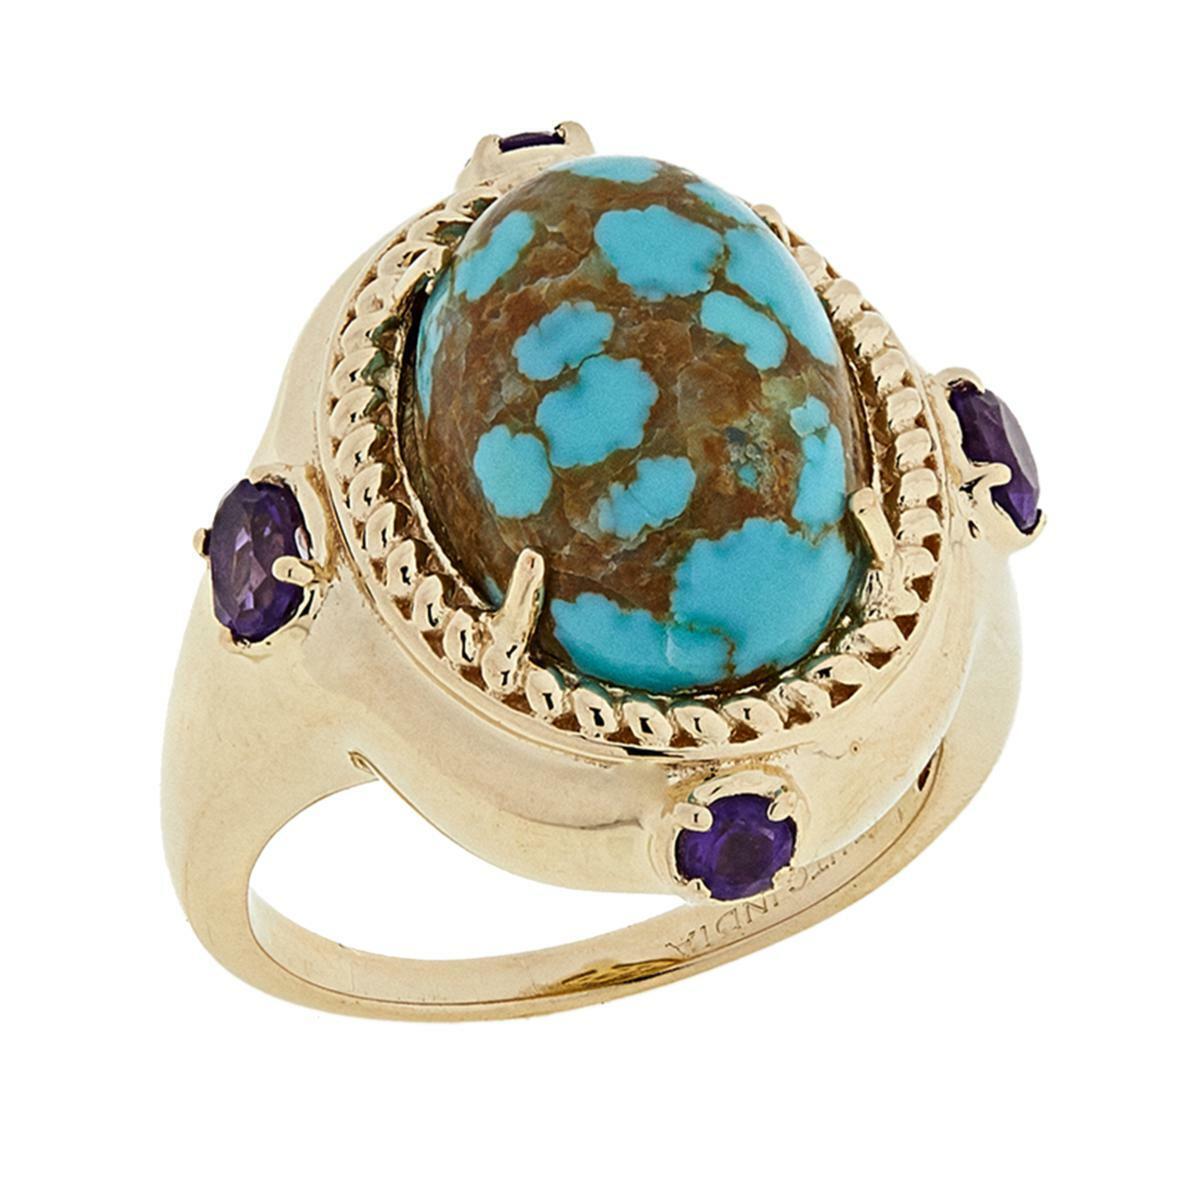 Paul Deasy Oval Turquoise and Amethyst Ring, Size 7 (374264842894)